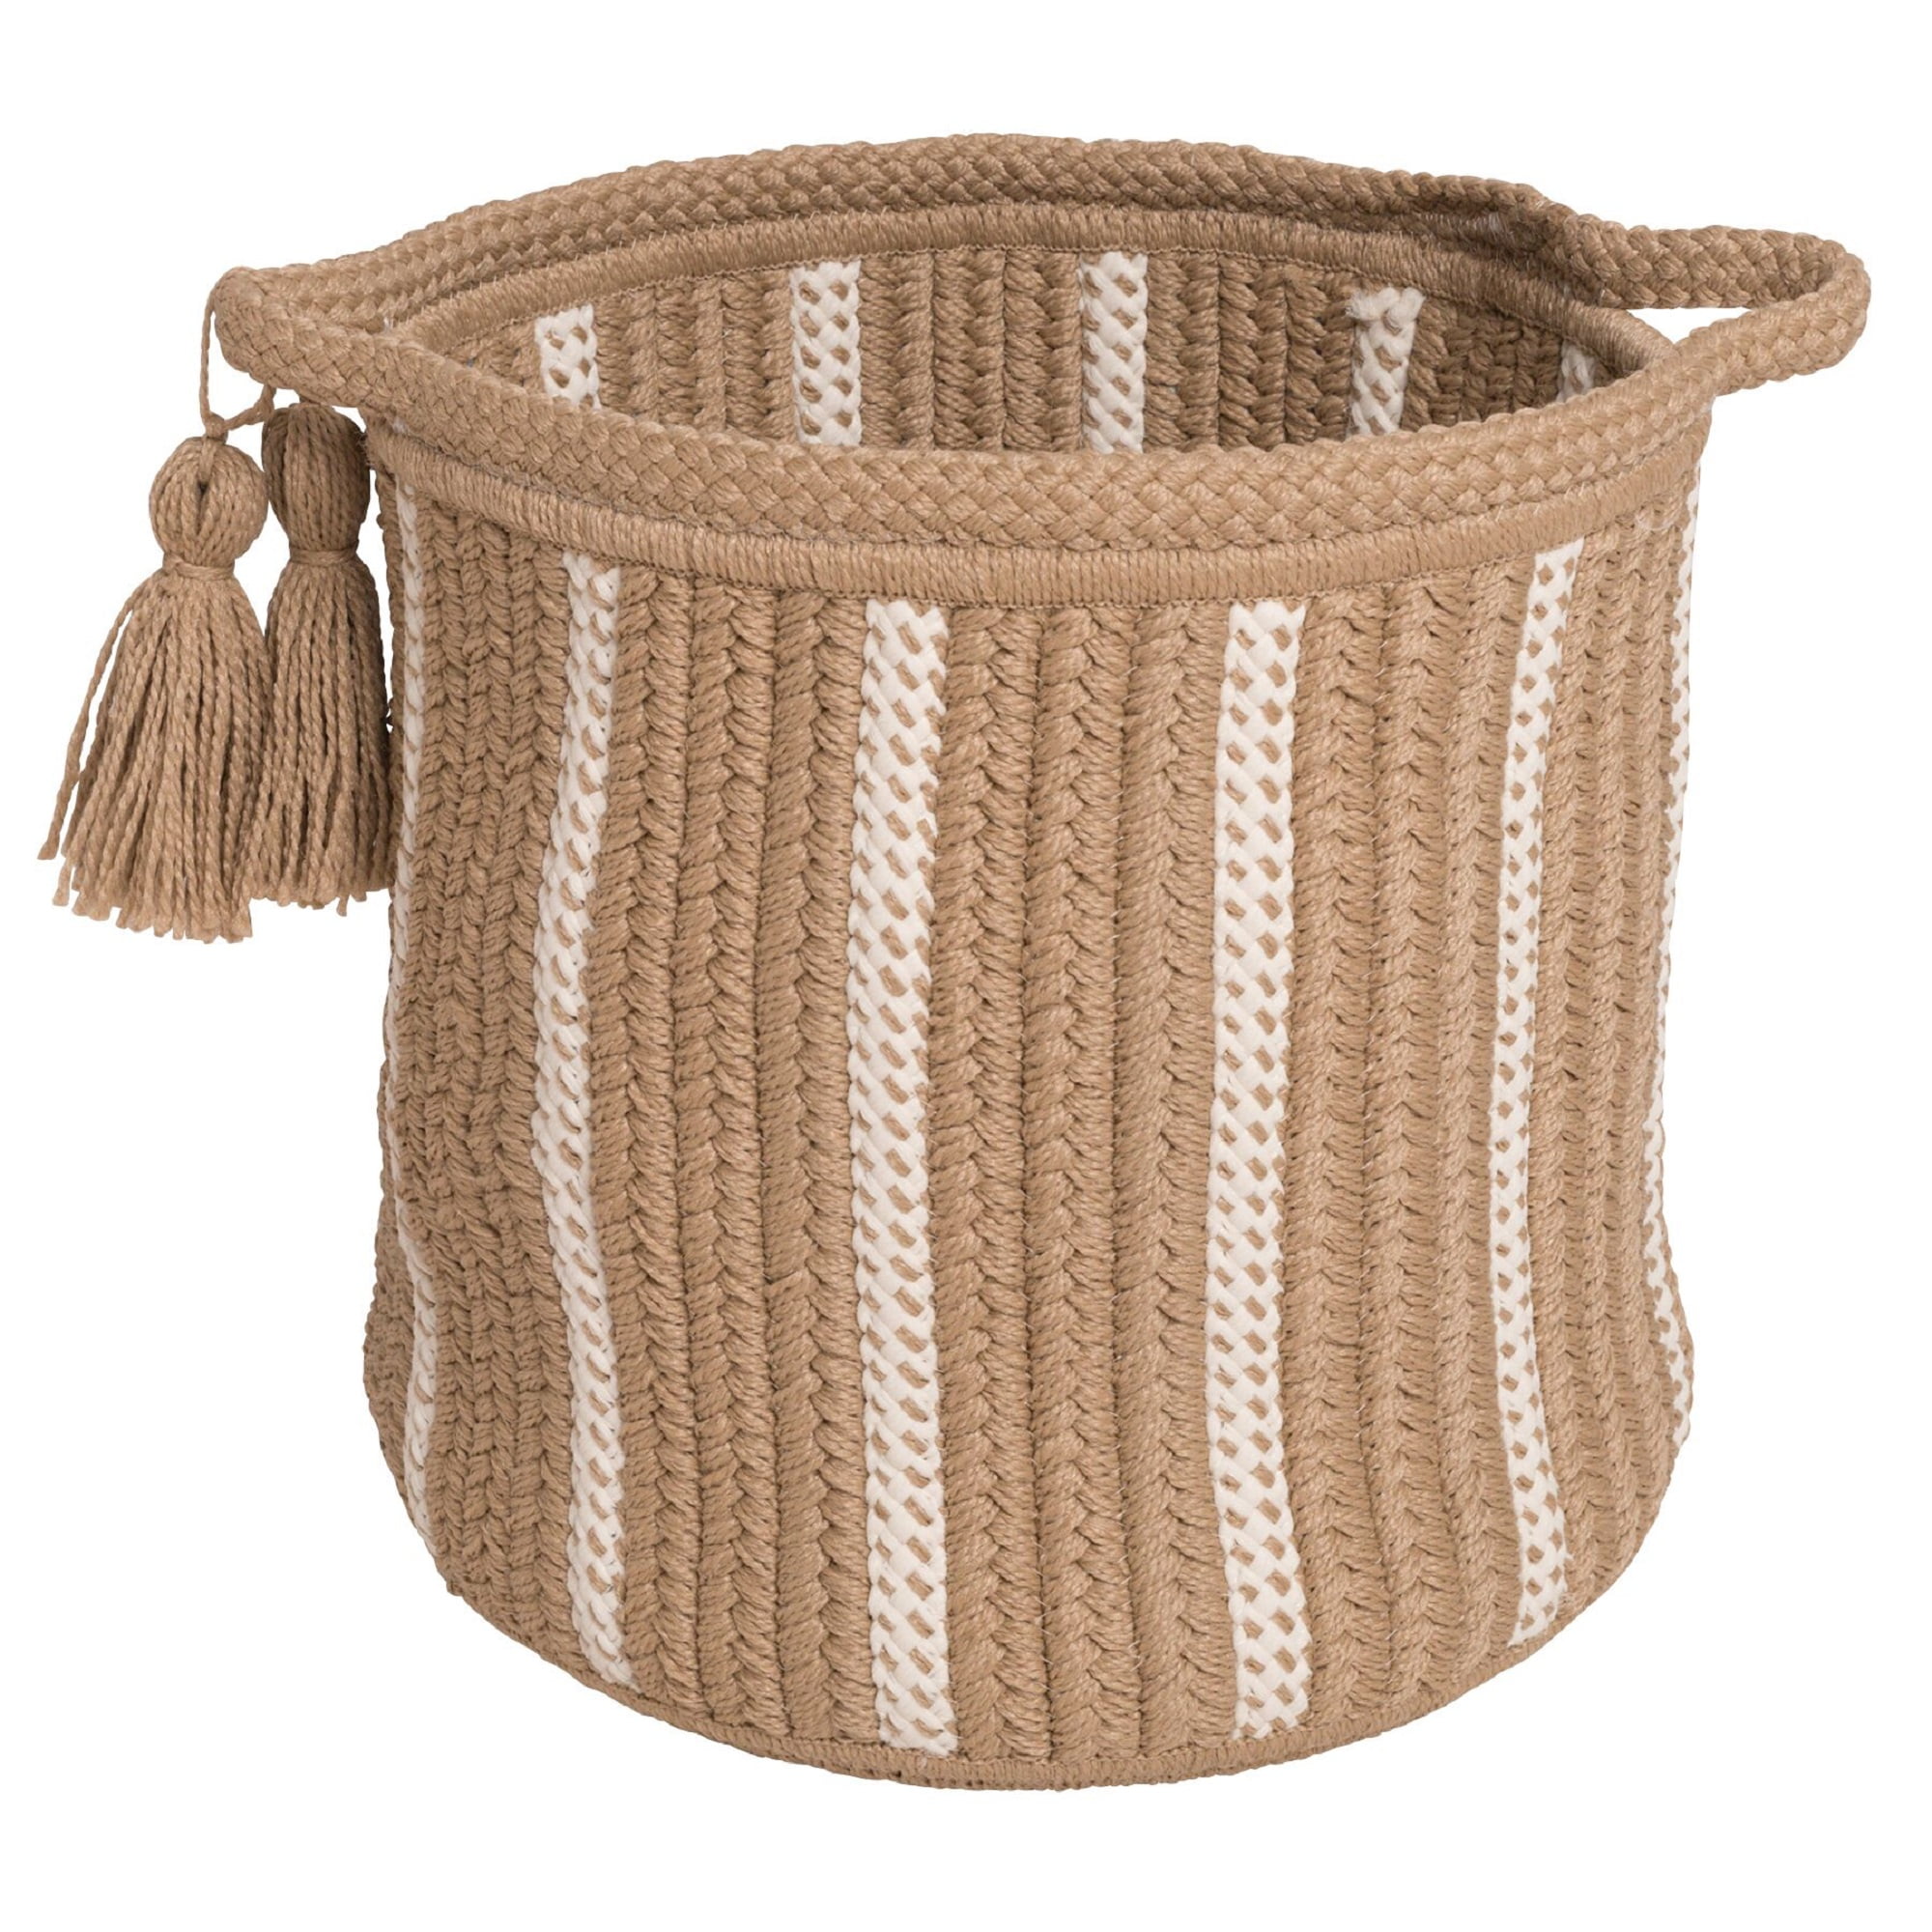 Colonia Mills Vb21 Dublin Basket, Taupe & White - 20 X 20 X 14 In.